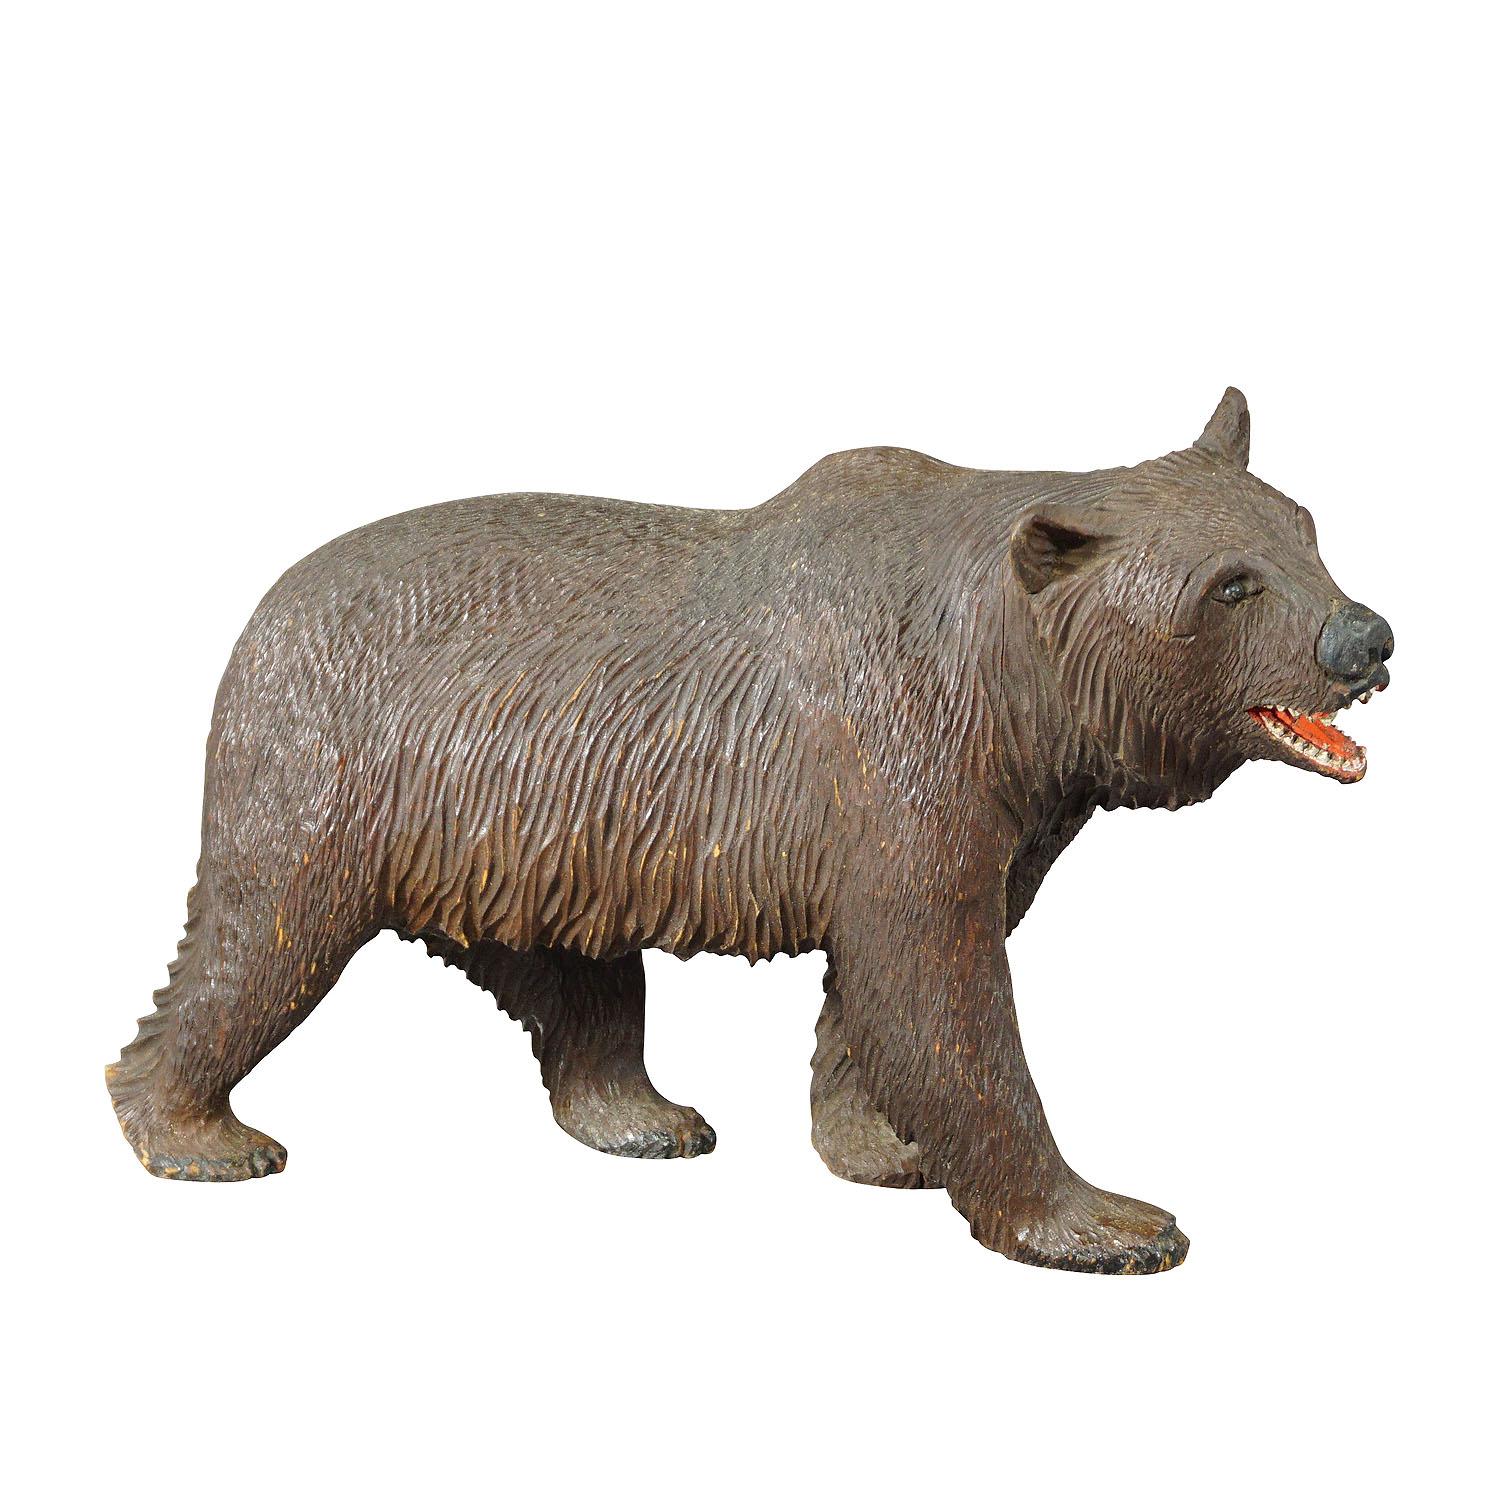 Large Wooden strolling bear handcarved in Brienz ca. 1930

A large antique statue of a walking bear. Made of lindenwood, finely handcarved with naturalistic details in Brienz, Switzerland ca. 1930. A nice example of the famous Black Forest